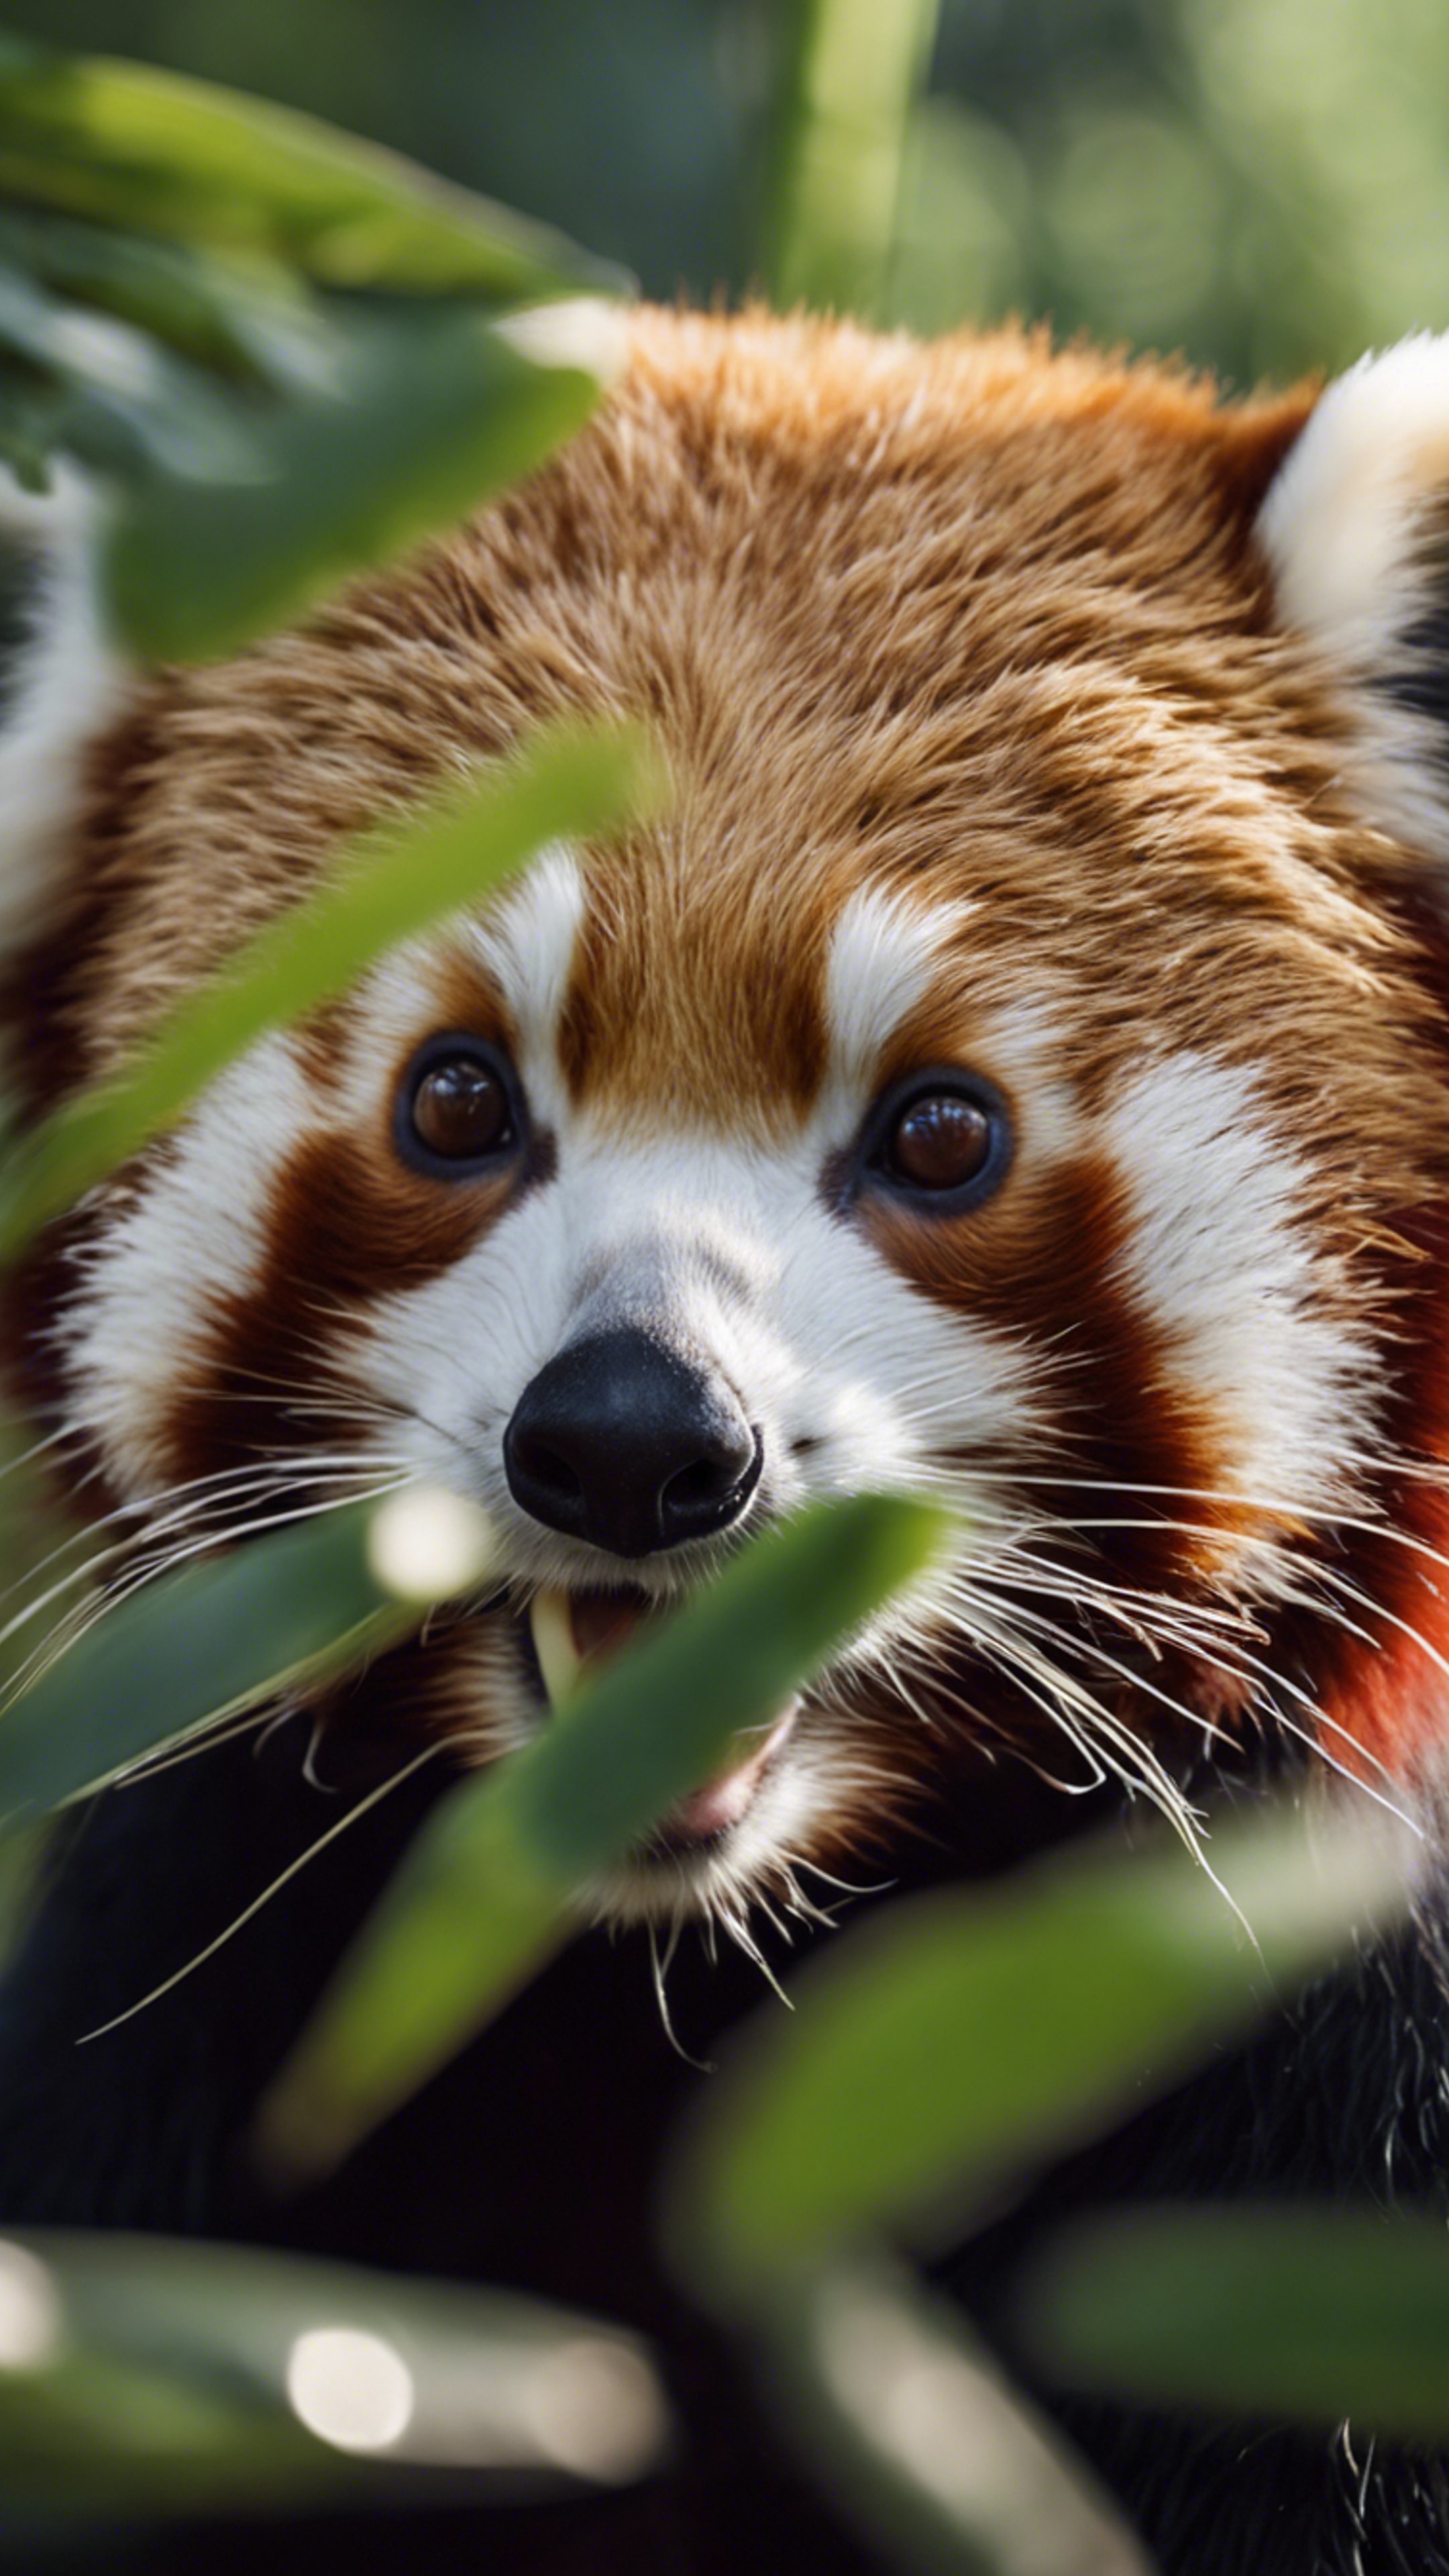 A close-up of a red panda munching on bamboo leaves Papel de parede[20c4a1c4fccc4fa88325]